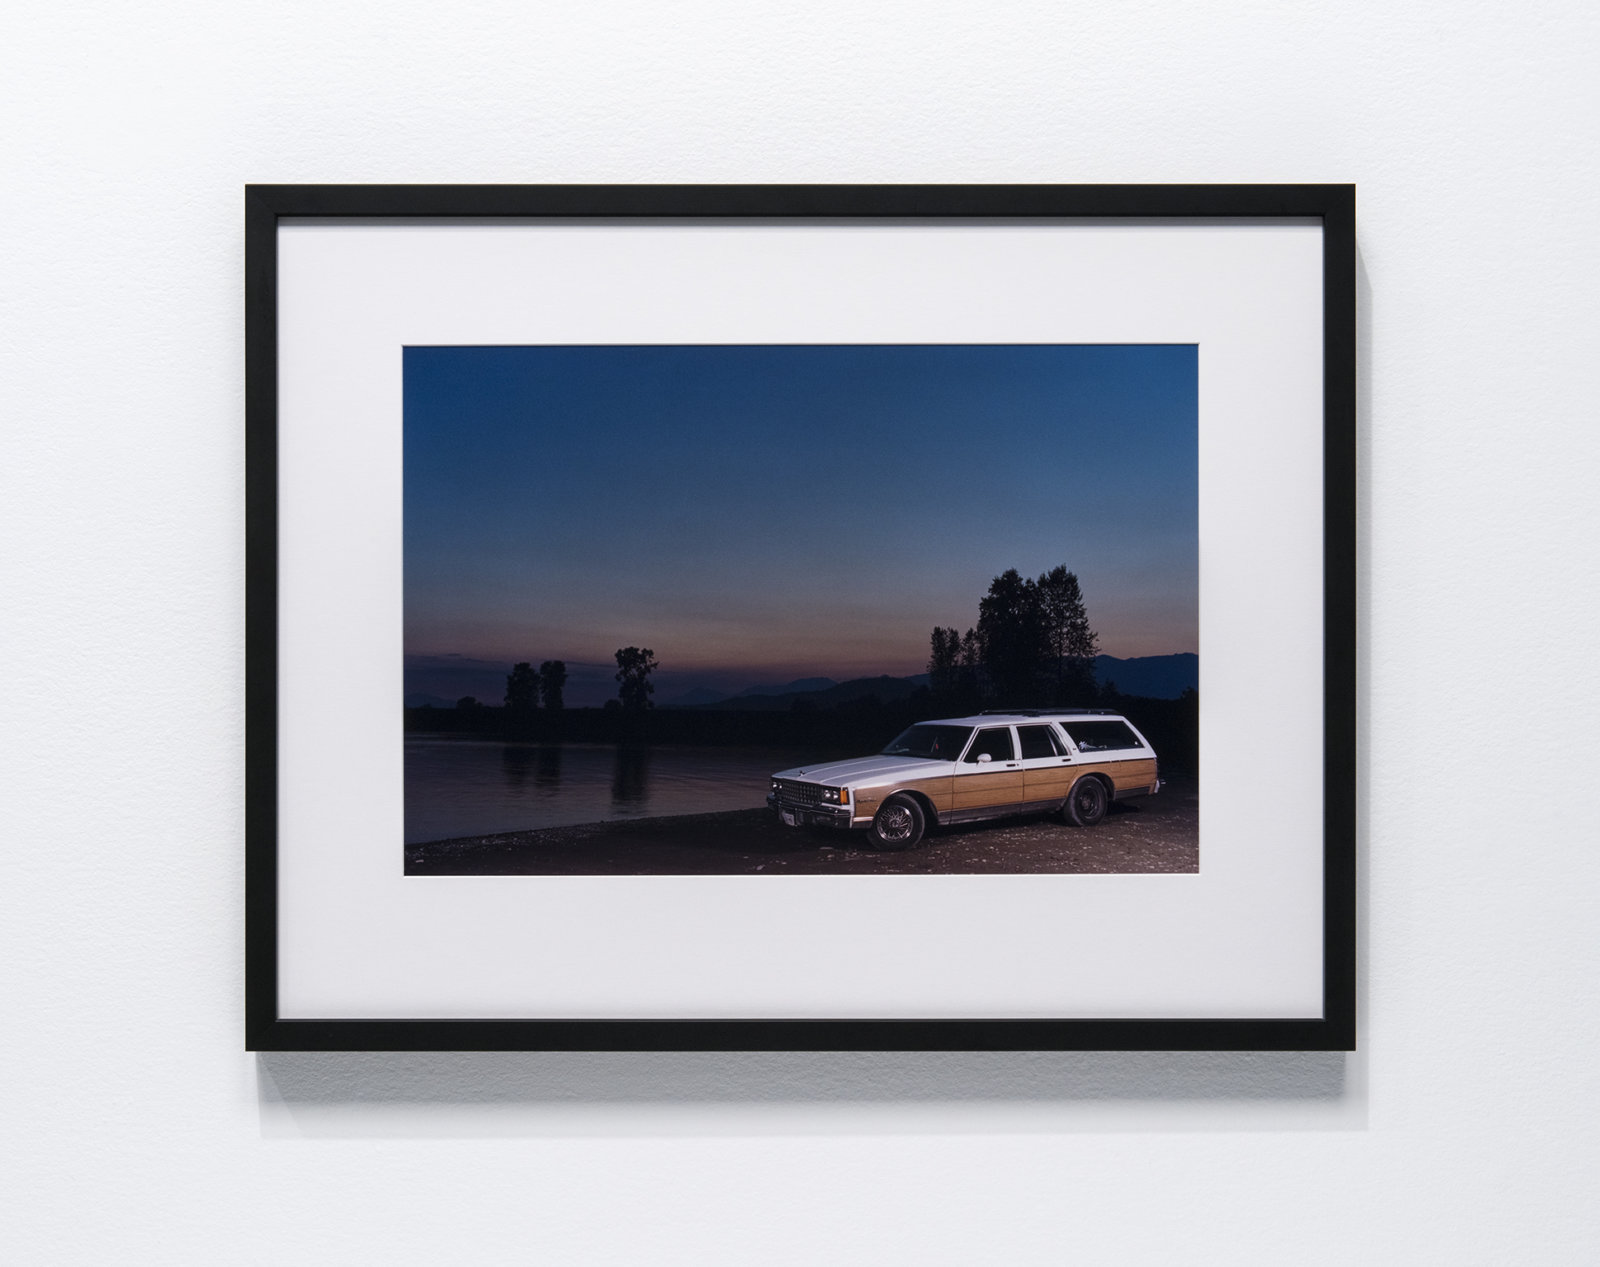 Kevin Schmidt, 1984 Chevrolet Caprice Classic Wagon, 94000 kms. Good Condition. Engine Needs Minor Work, $1200 OBO 604 888 3243, 2000, c-print, 16 x 20 in. (41 x 51 cm)